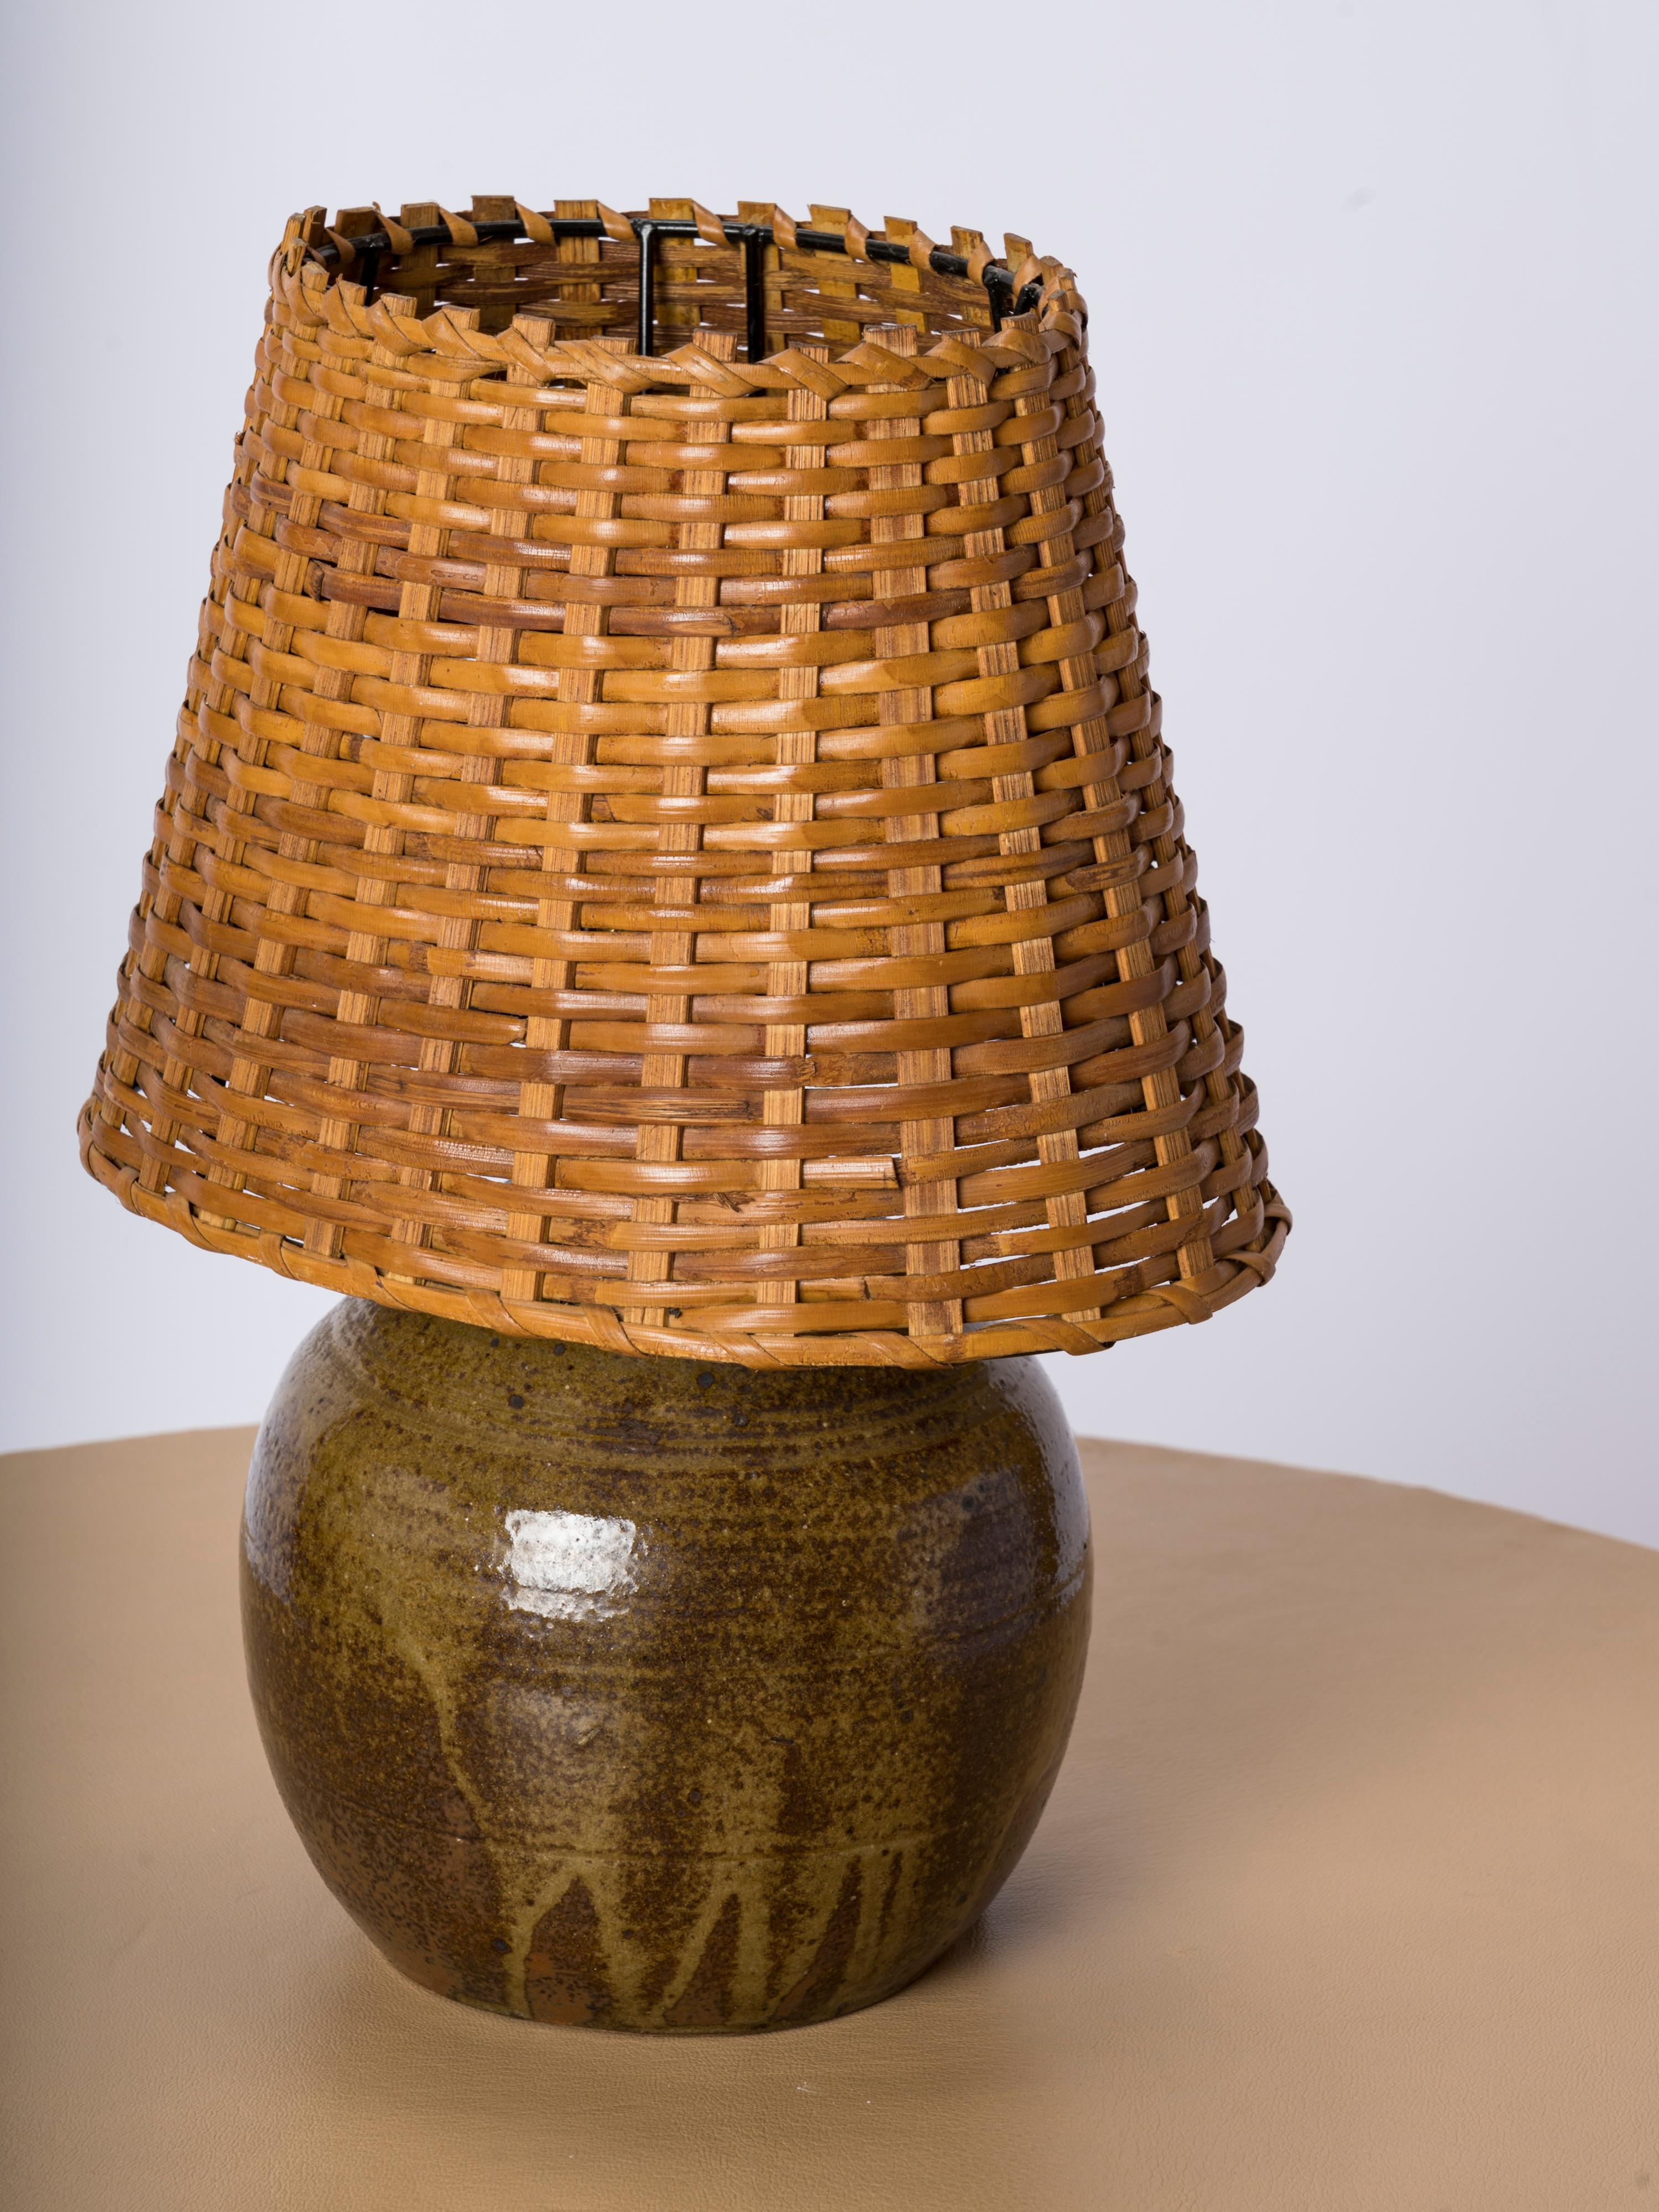 Shades of Green Petite Ceramic Table Lamp w. Wicker Shade - France 1970's In Good Condition For Sale In New York, NY